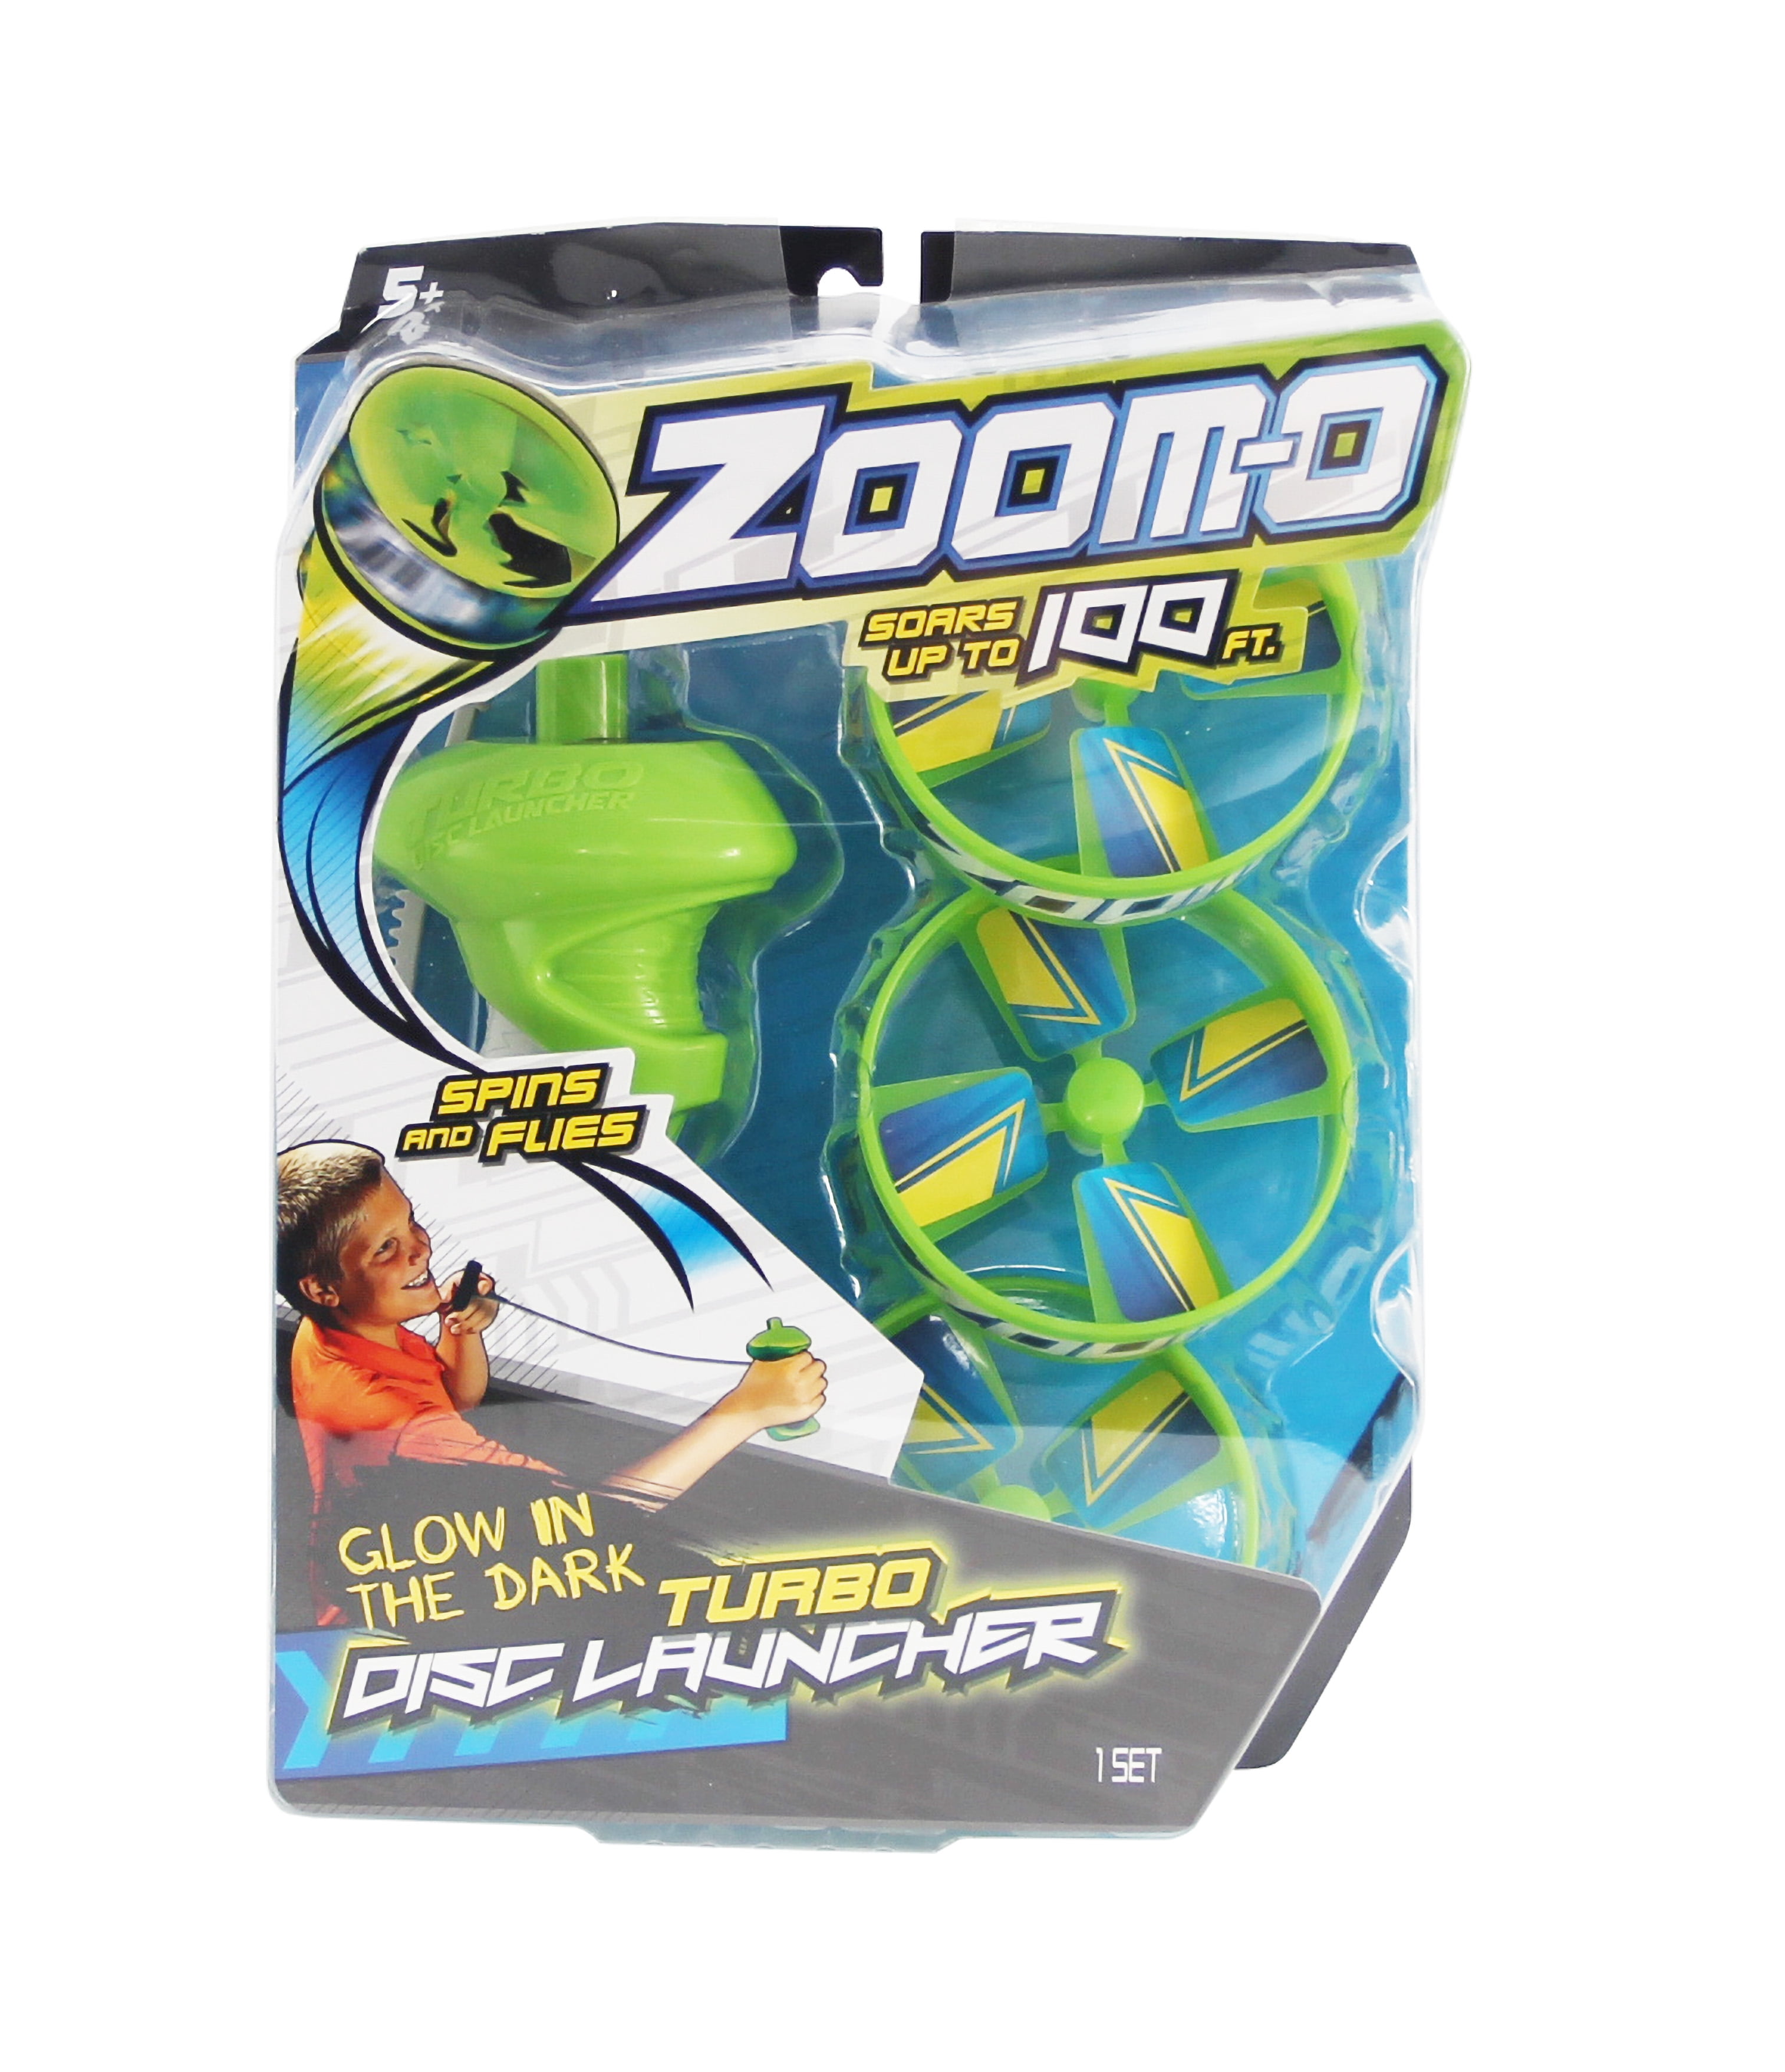 Zoom-O HIGH FLYING  Turbo Disc Launcher Glow in the Dark